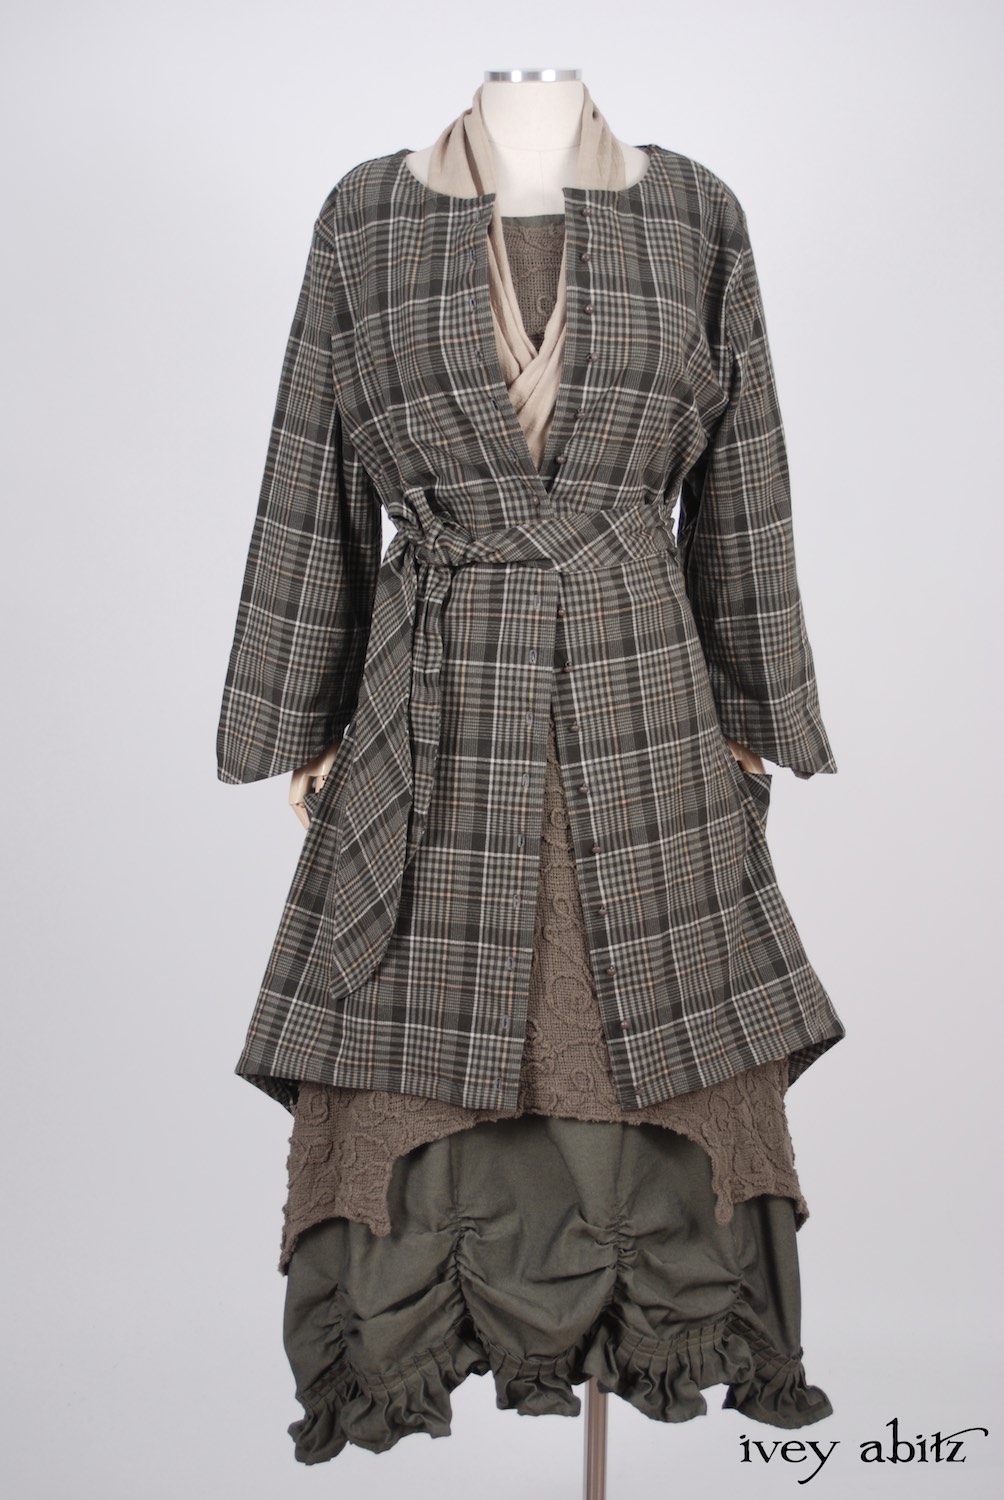 Ivey Abitz - Wildefield Duster Coat in Meadow Stretchy Plaid Cotton, High Water Length - Chittister Dress in Meadow Embroidered Swirl Gauze - Blanchefleur Sash in Blushed Plaid Voile - Edenshire Frock in Morning Meadow Yarn Dyed Cotton, Low Water Length